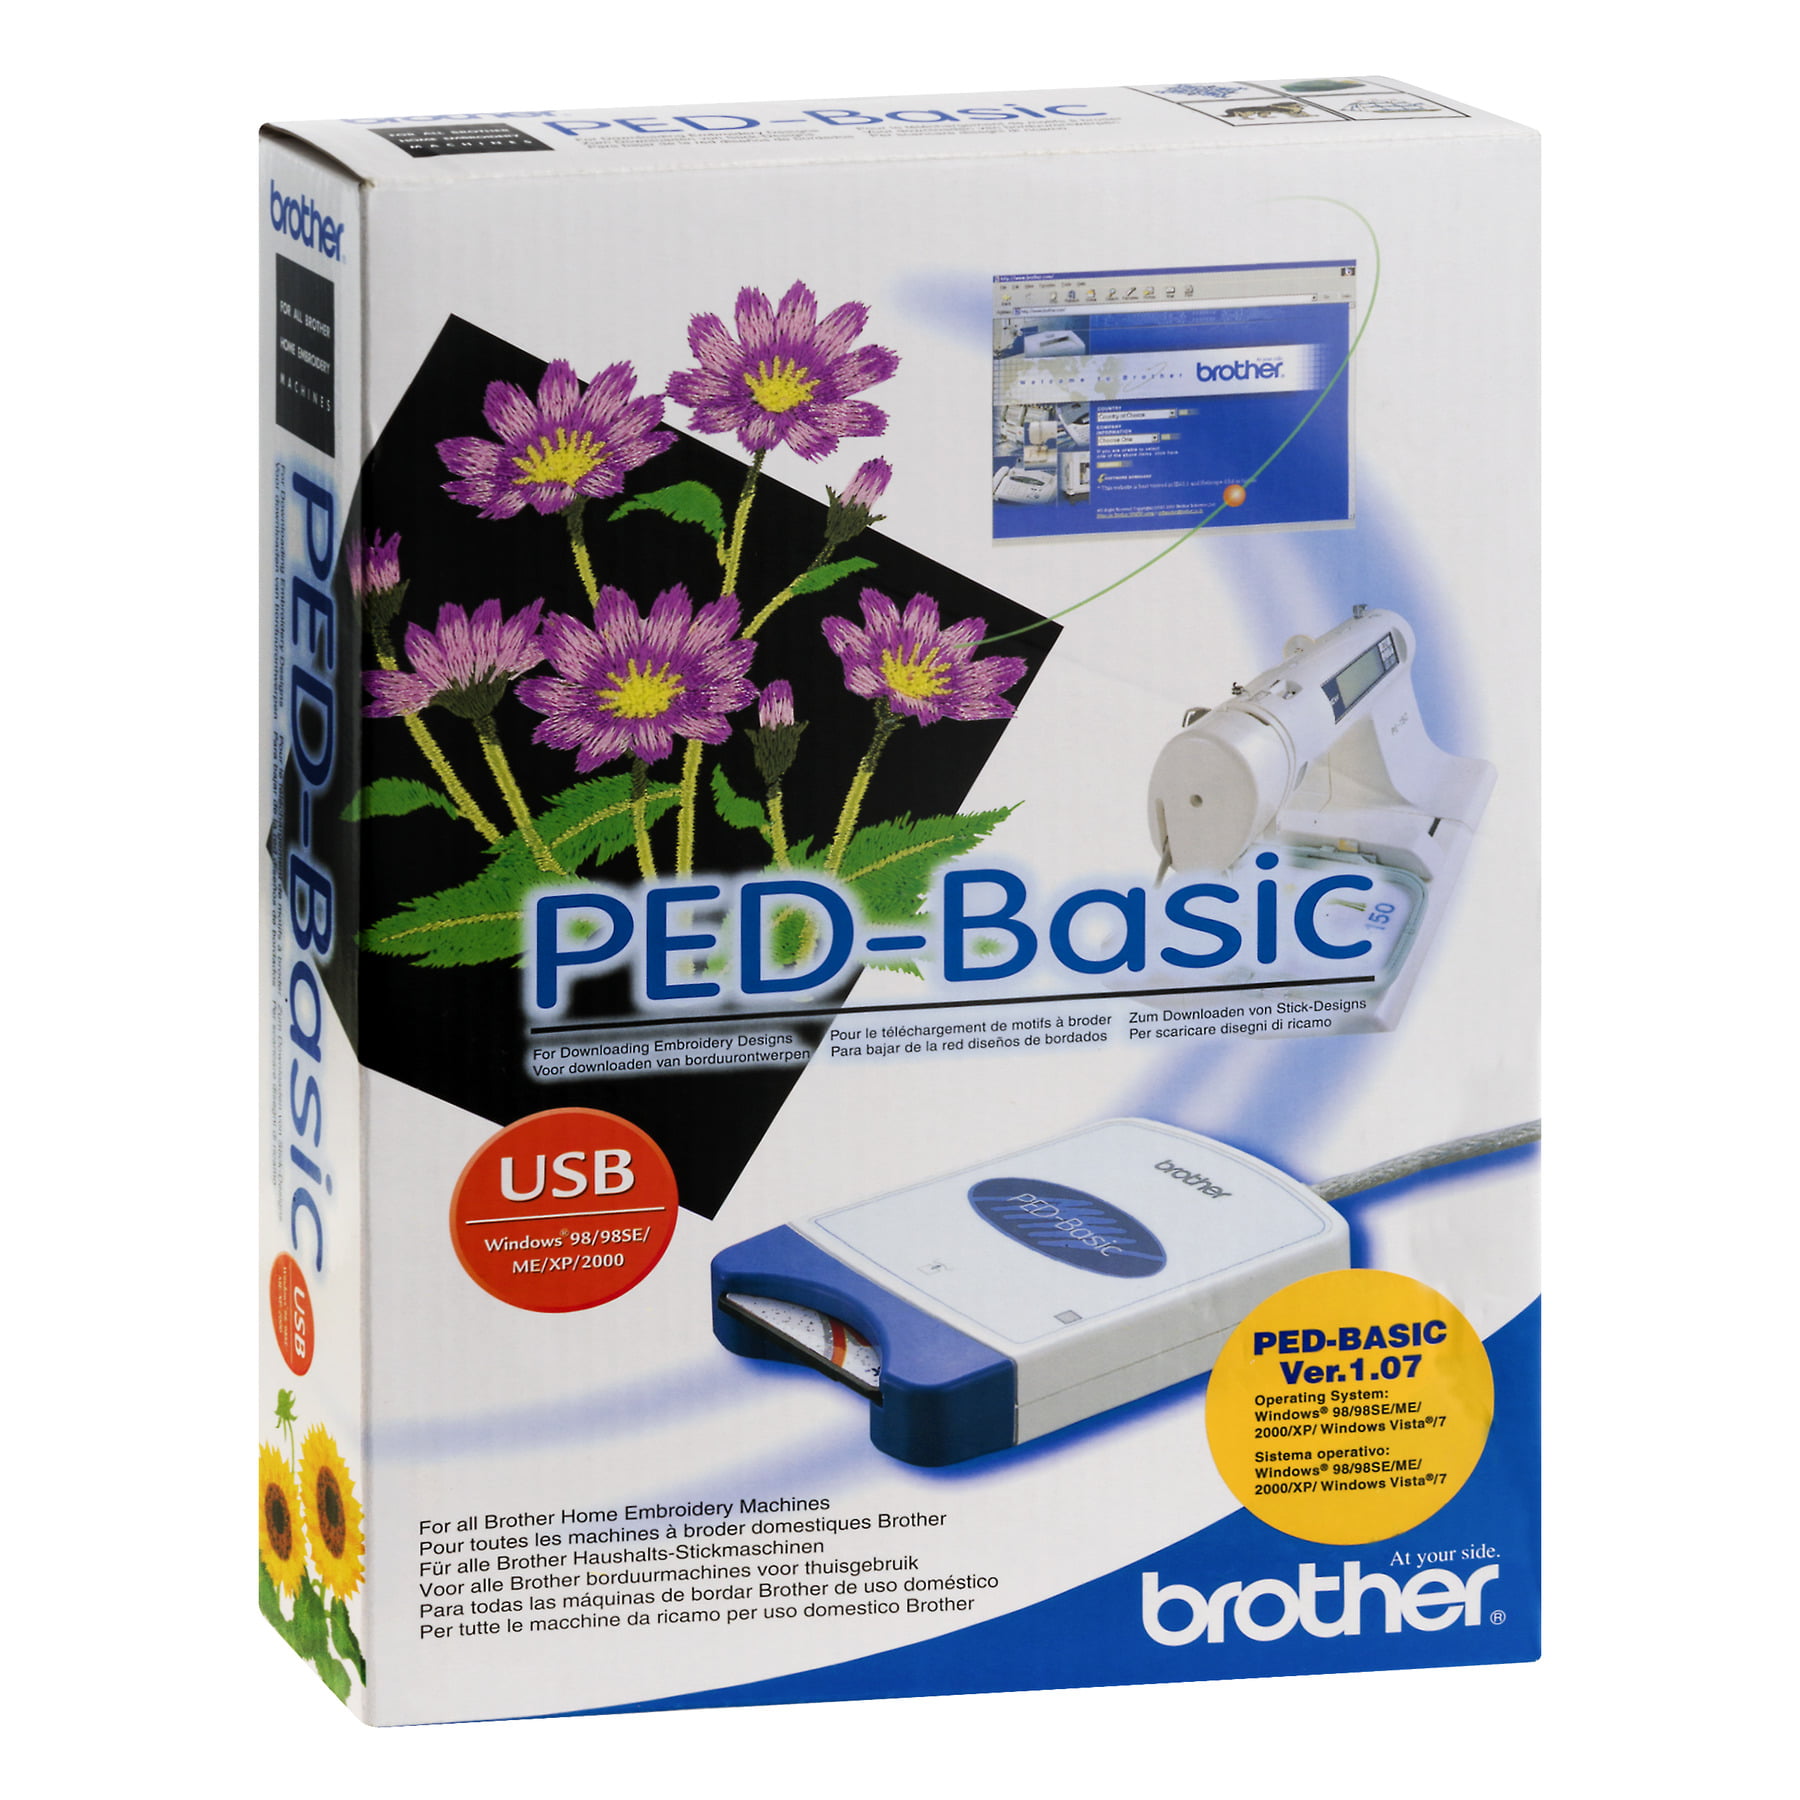 brother ped basic driver